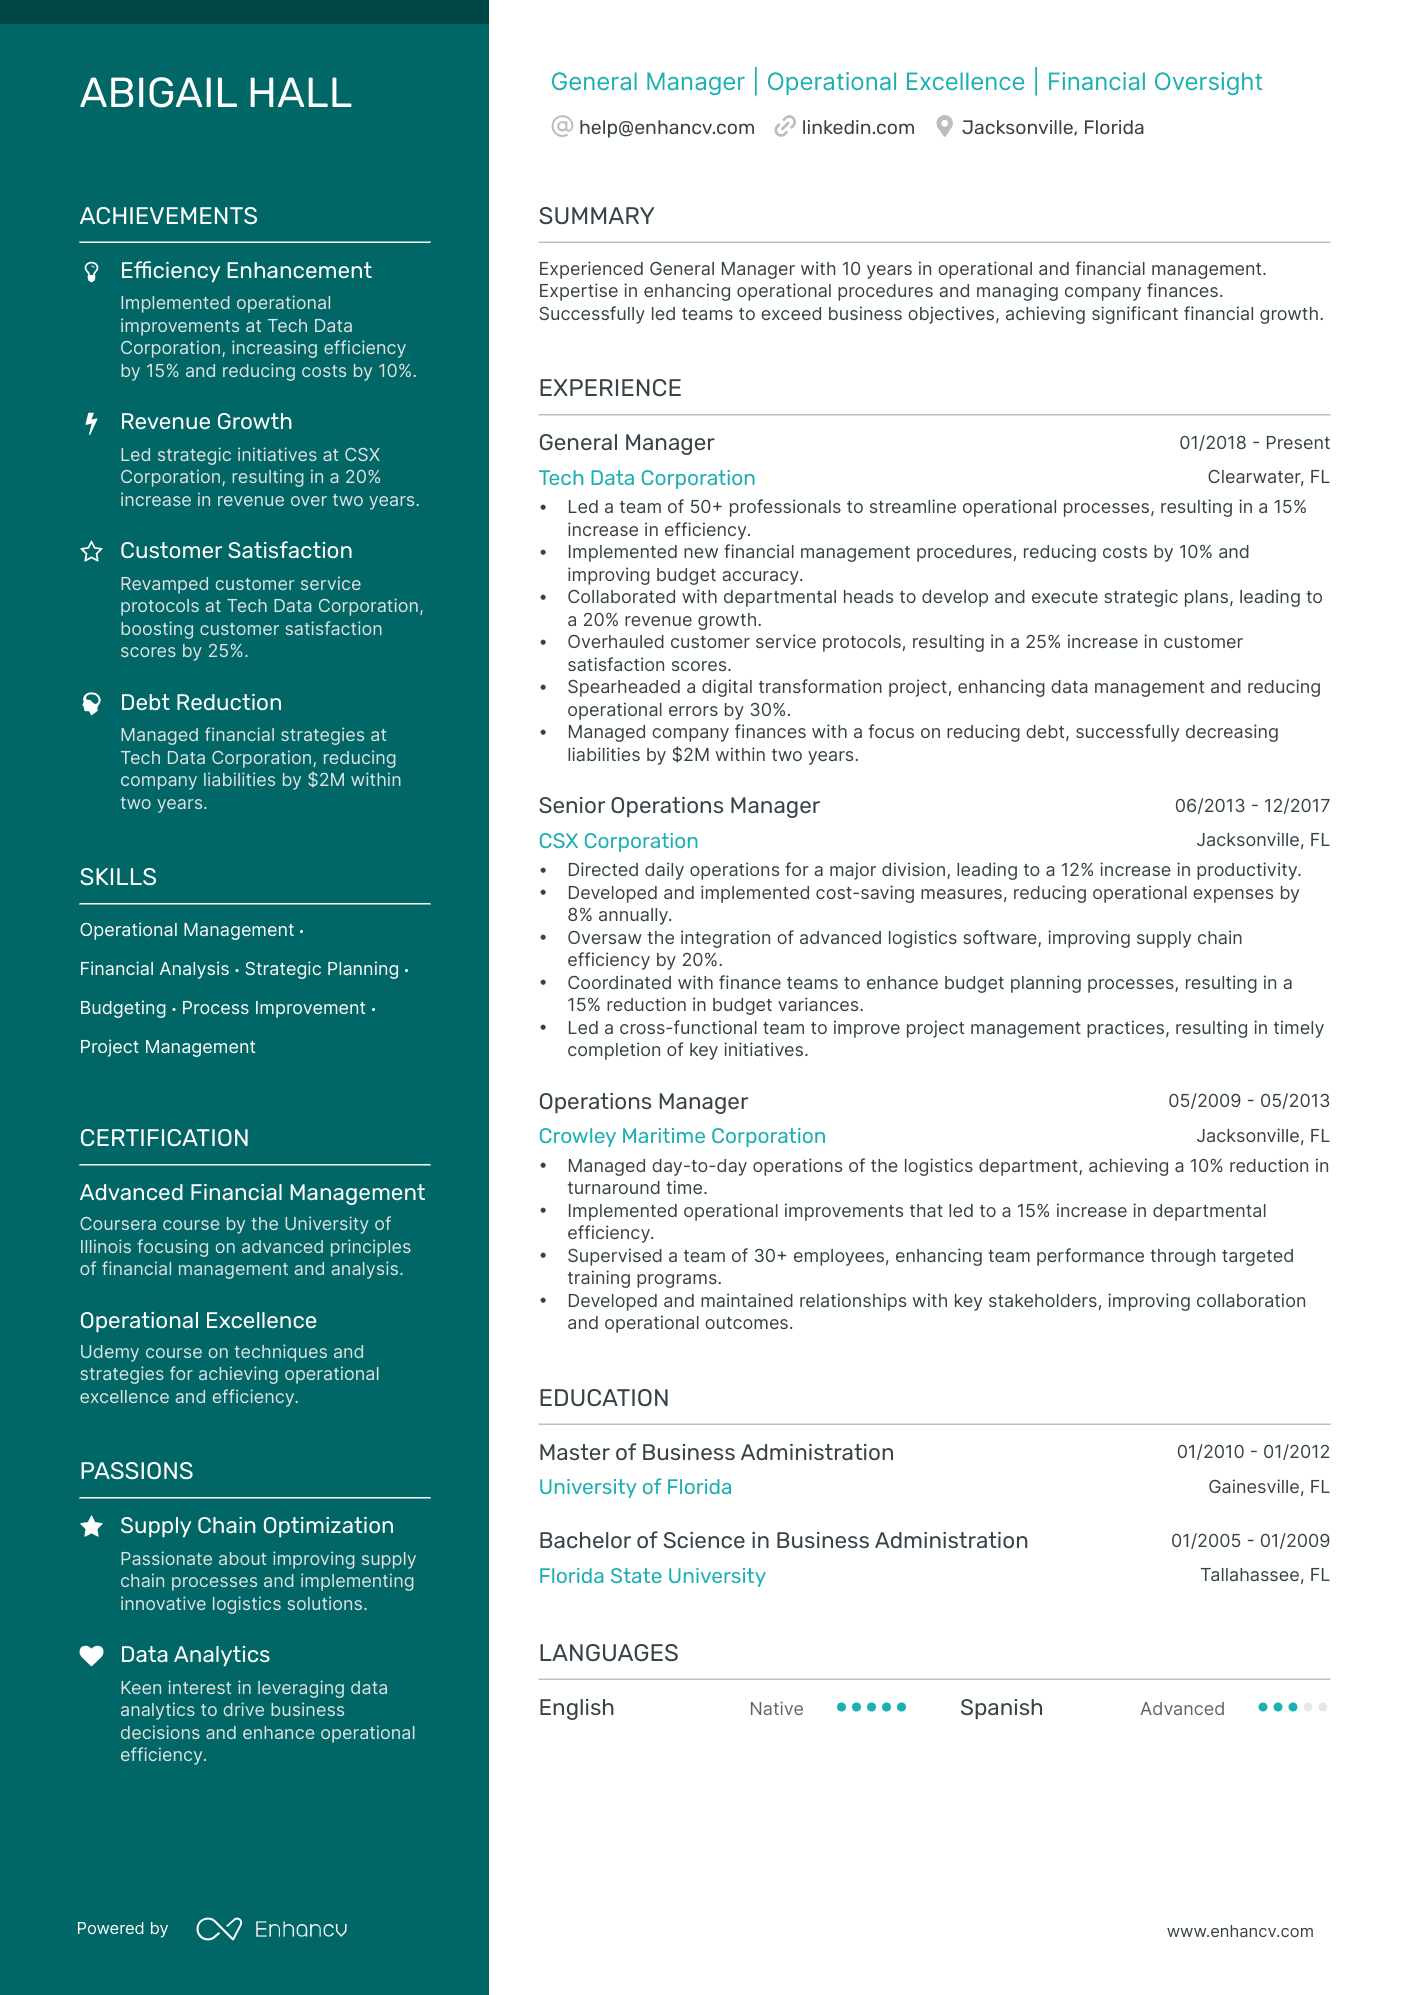 General Manager resume example